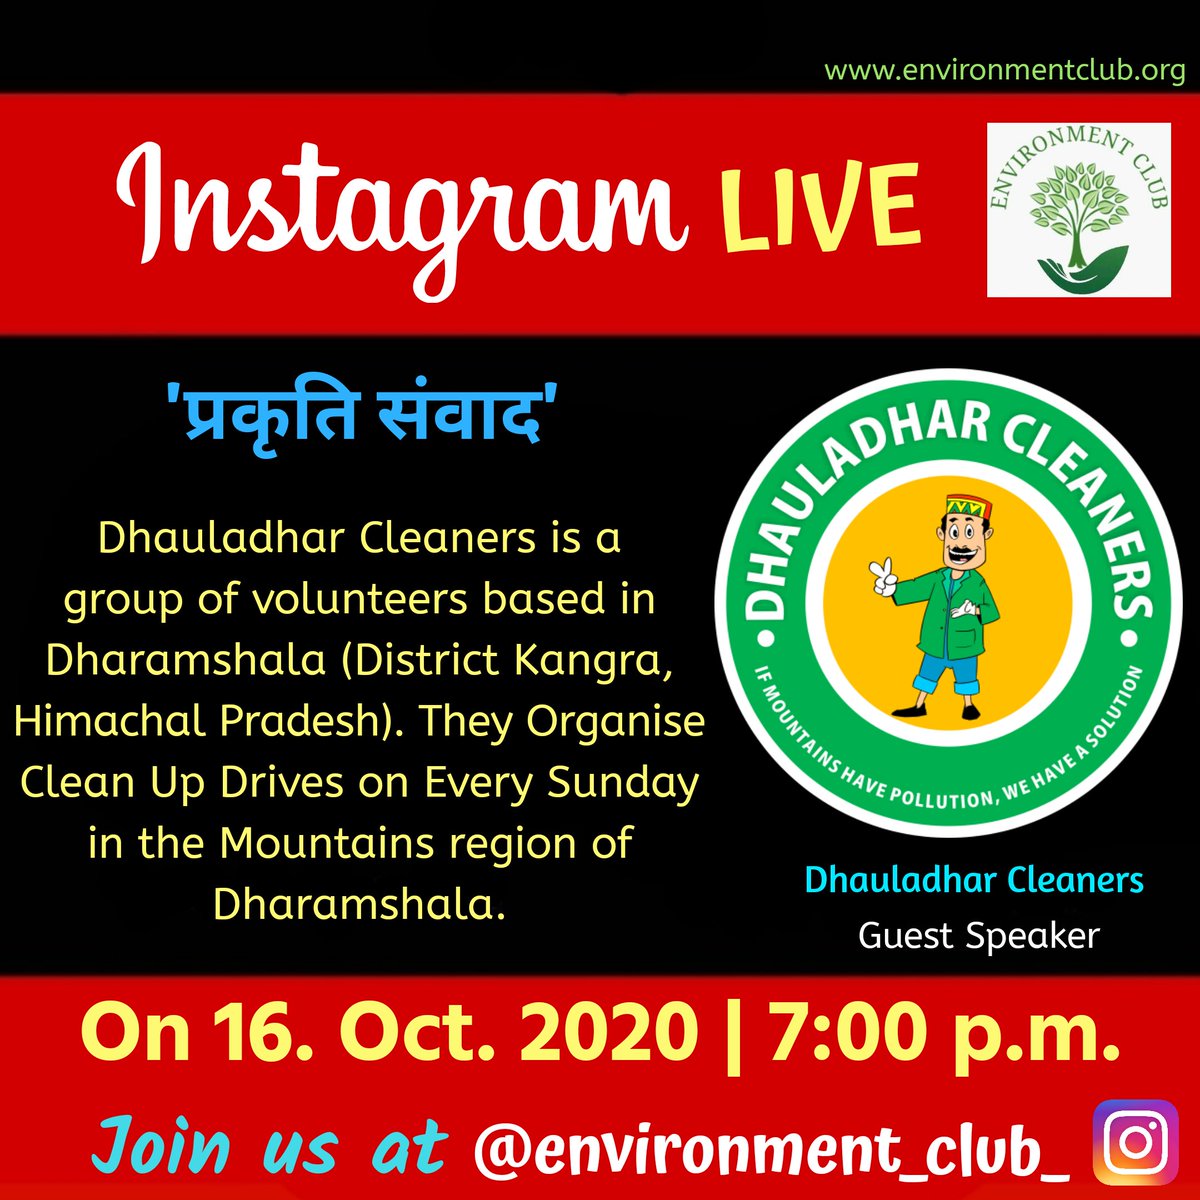 Presenting the 5th Session of #प्रकृति_संवाद 🌟

Join the LIVE with @Dhauladharclnrs Today 7 p.m. at Our Instagram Account @environment_club_ 

Link to Our Instagram Handle 👇
instagram.com/environment_cl…

#LIVE #Instagram #YouthForEnvironment  #EnvironmentalJustice 

@ClubCampaign